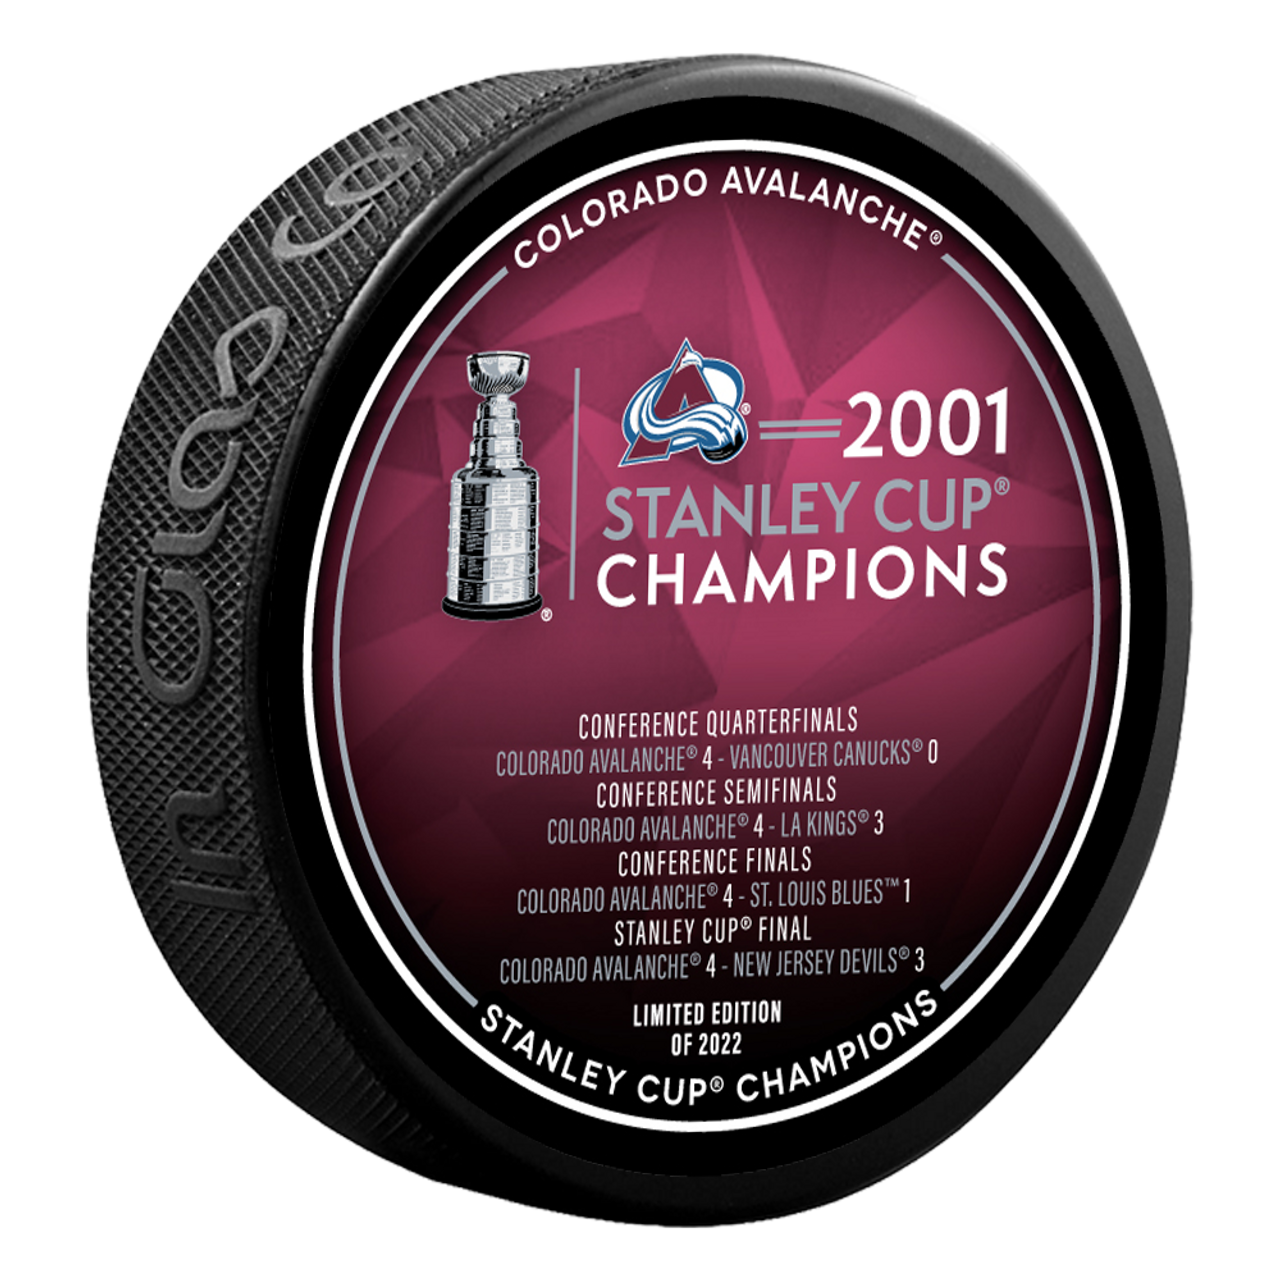 2001 STANLEY CUP CHAMPIONSHIP COLORADO AVALANCHE NEW JERSEY DEVILS